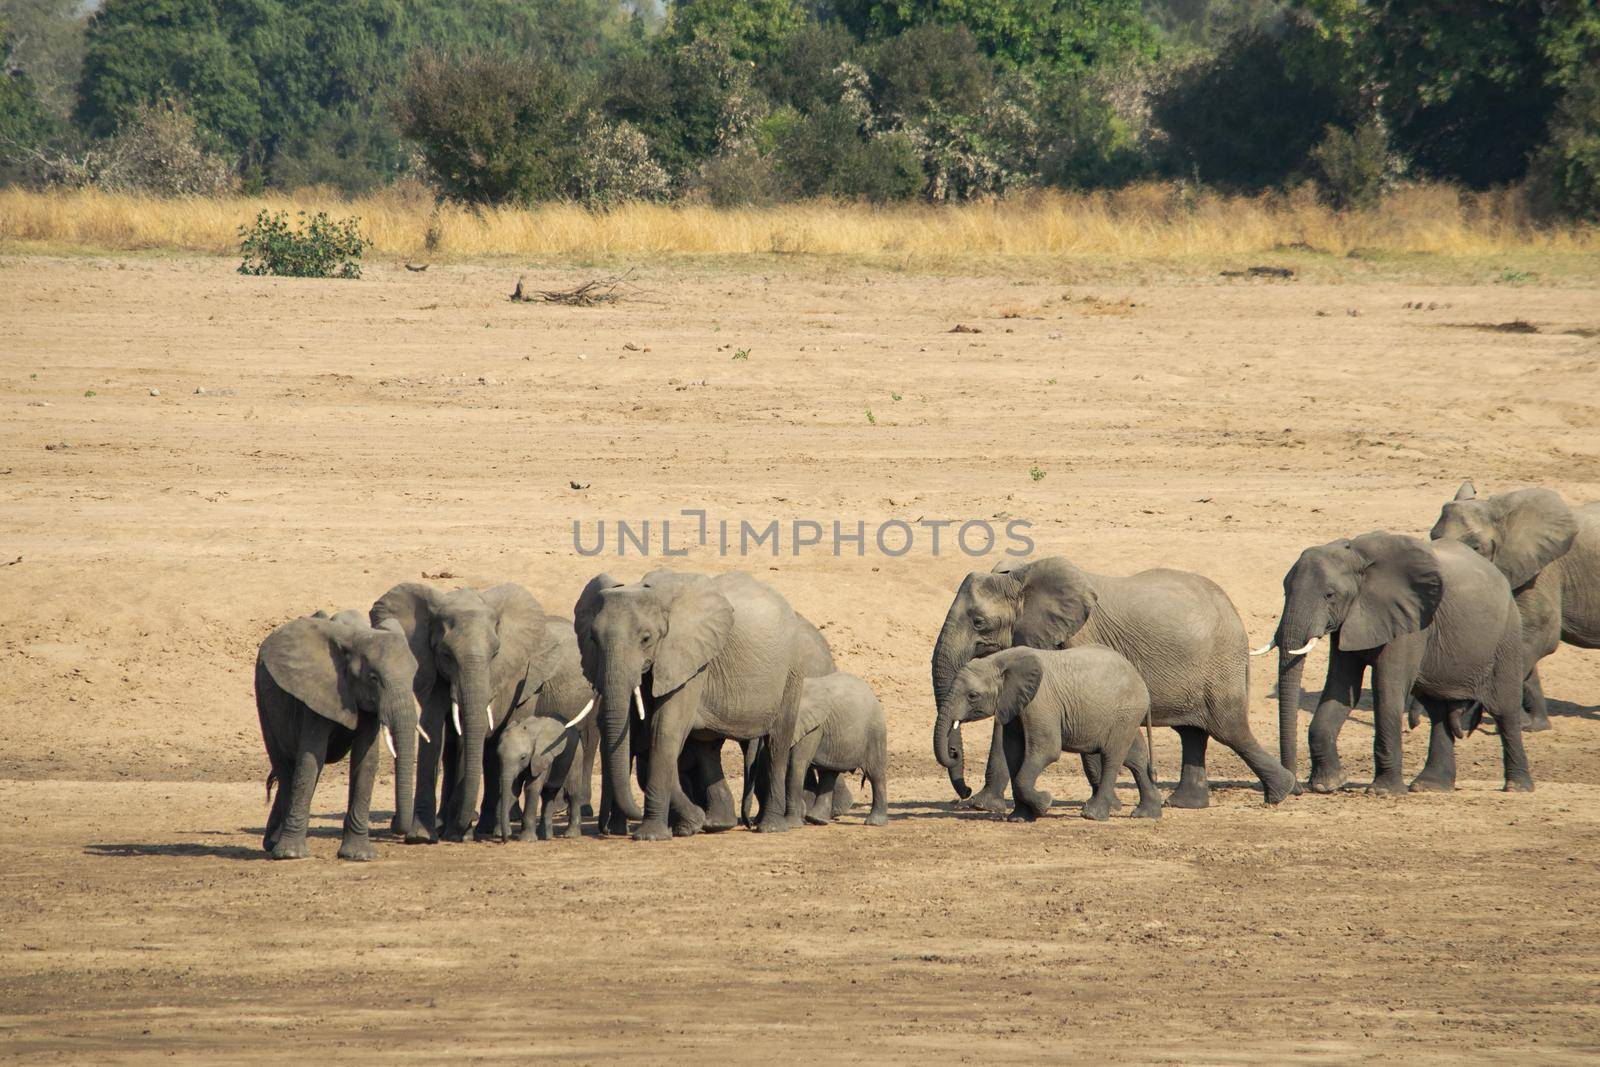 Amazing close up of a elephants family with cubs on the sandy banks of an African river by silentstock639